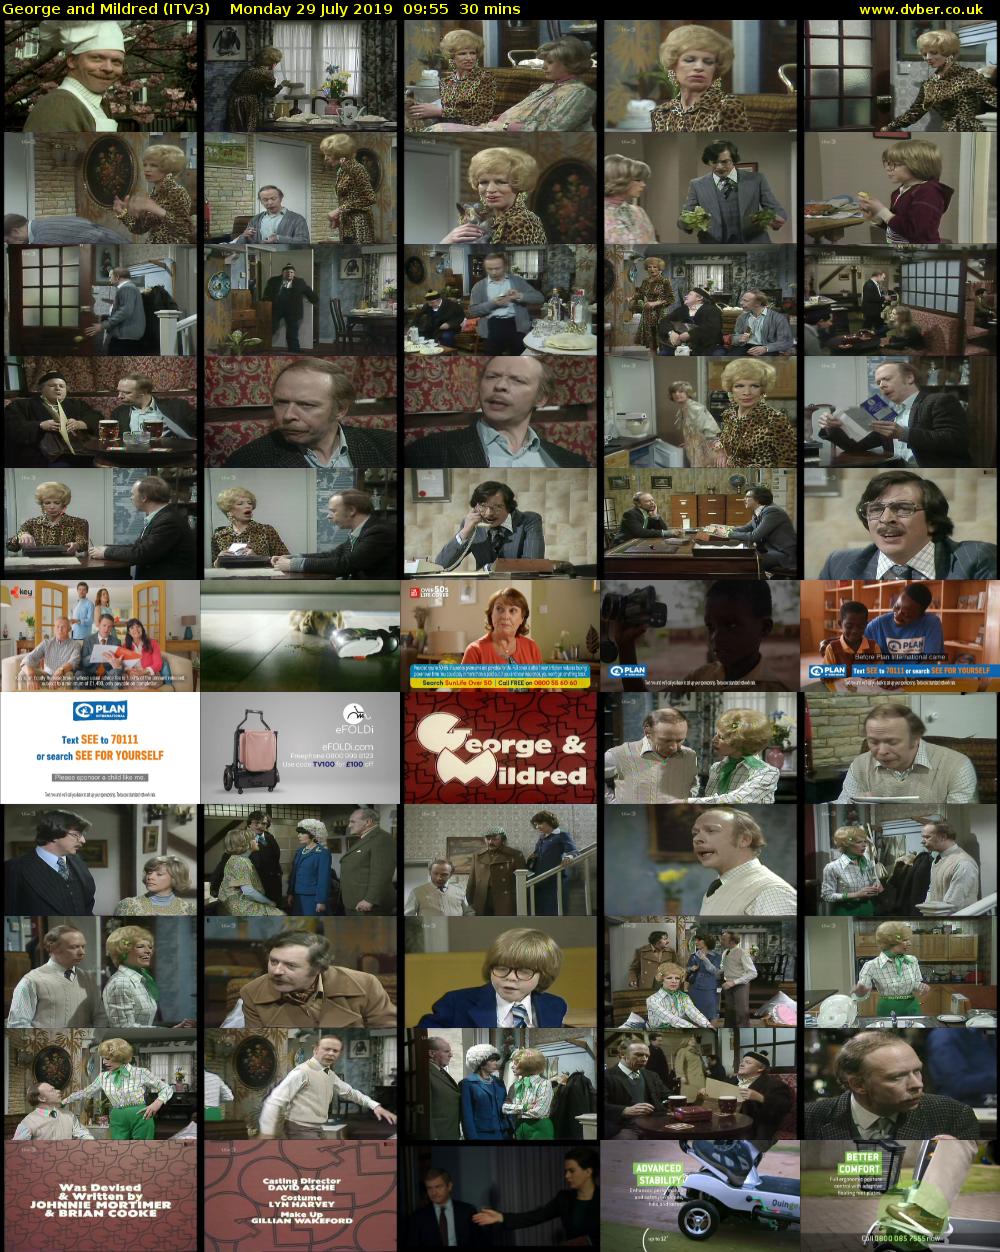 George and Mildred (ITV3) Monday 29 July 2019 09:55 - 10:25